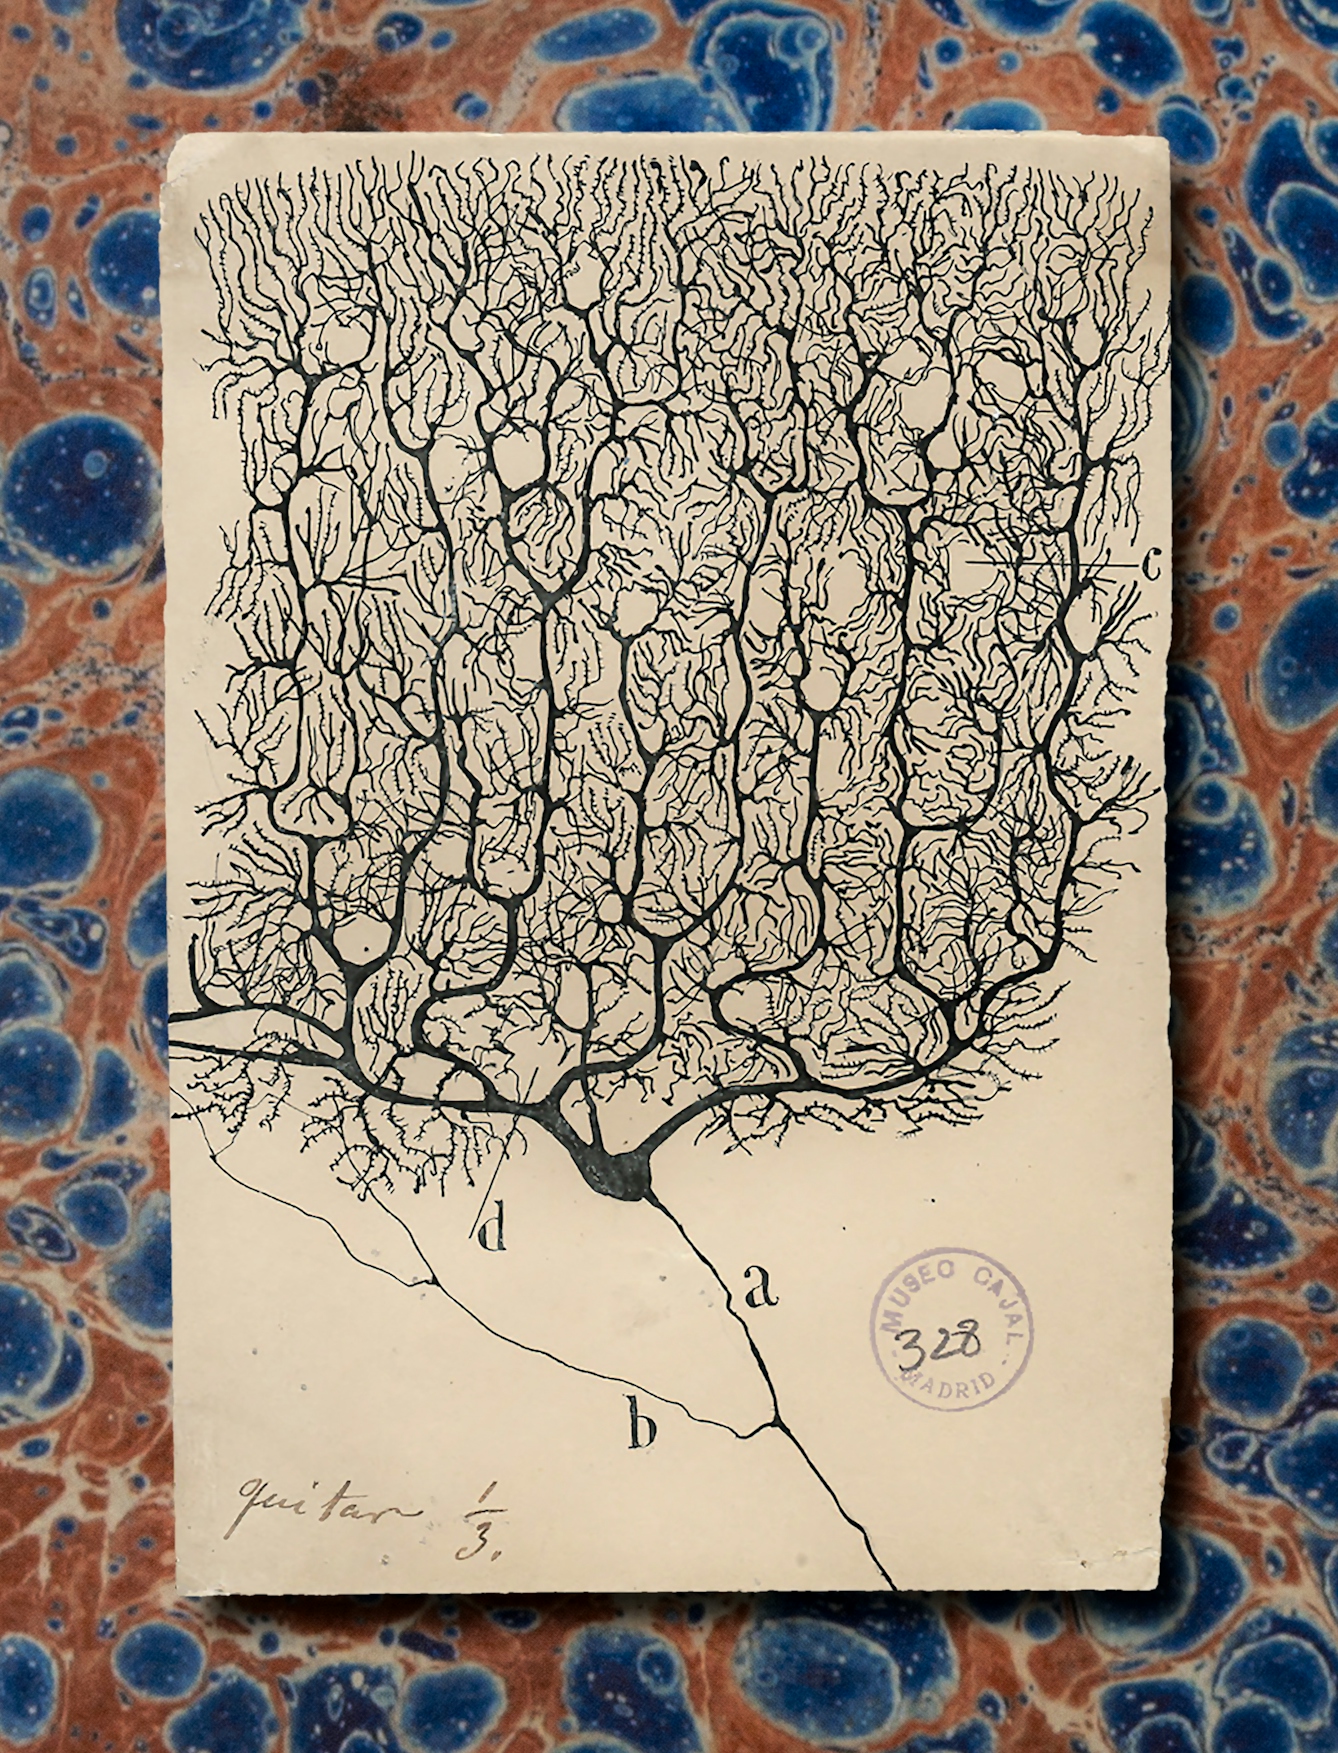 A illustration of a brain neuron and neural pathways. These are drawn with lines of black pen and heavy black markers. The illustration is against a red and blue cellular looking marbled background.